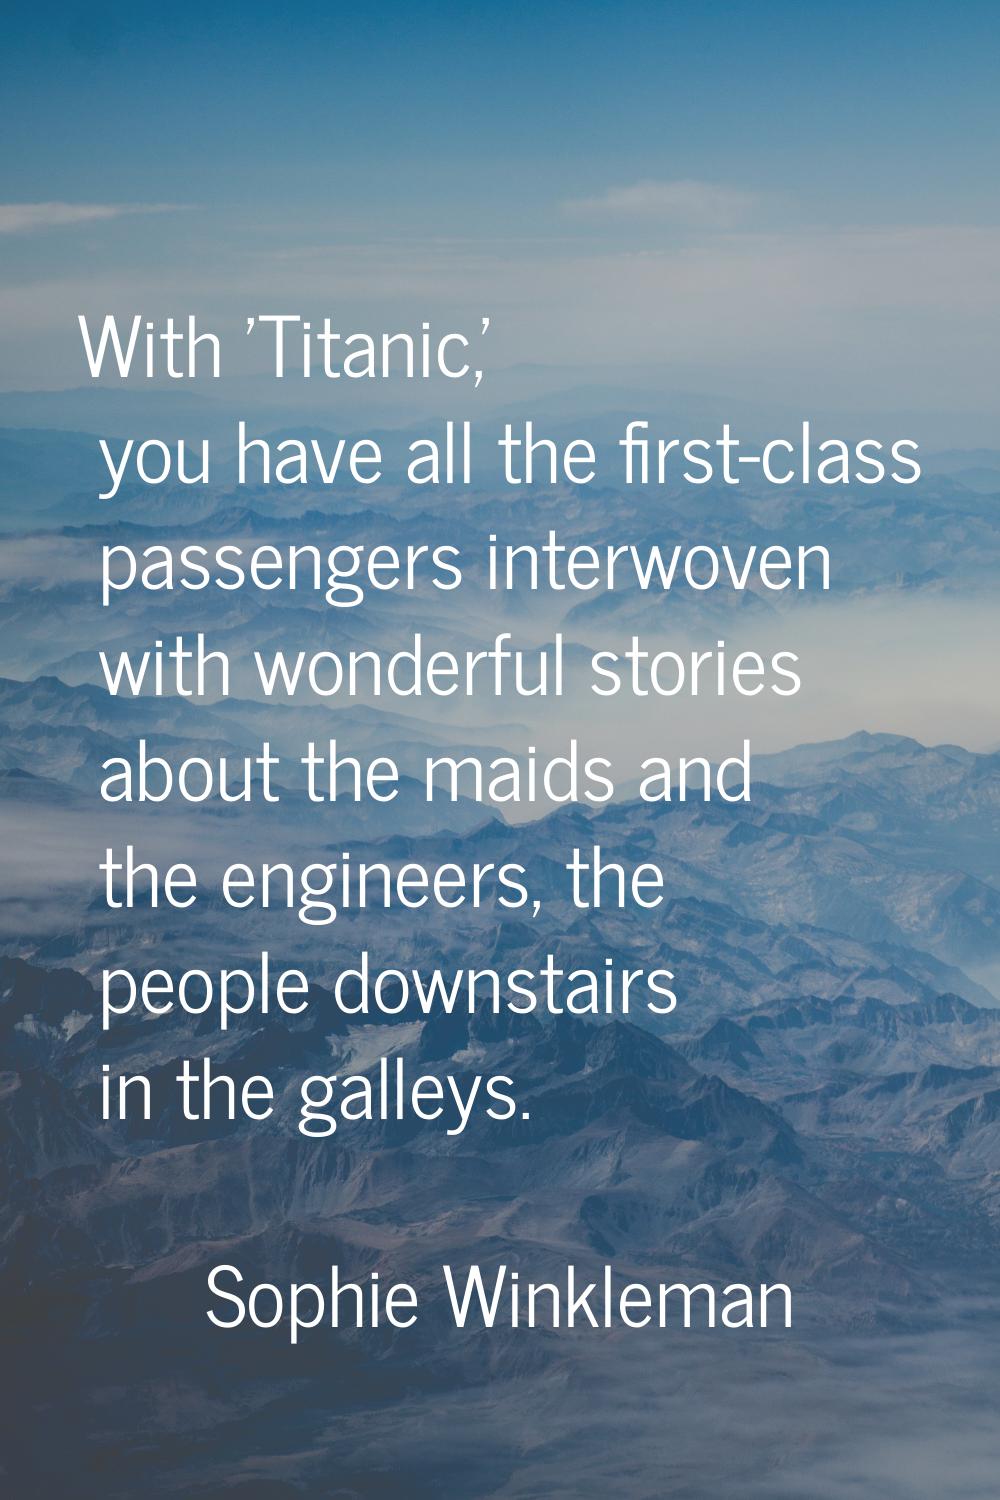 With 'Titanic,' you have all the first-class passengers interwoven with wonderful stories about the